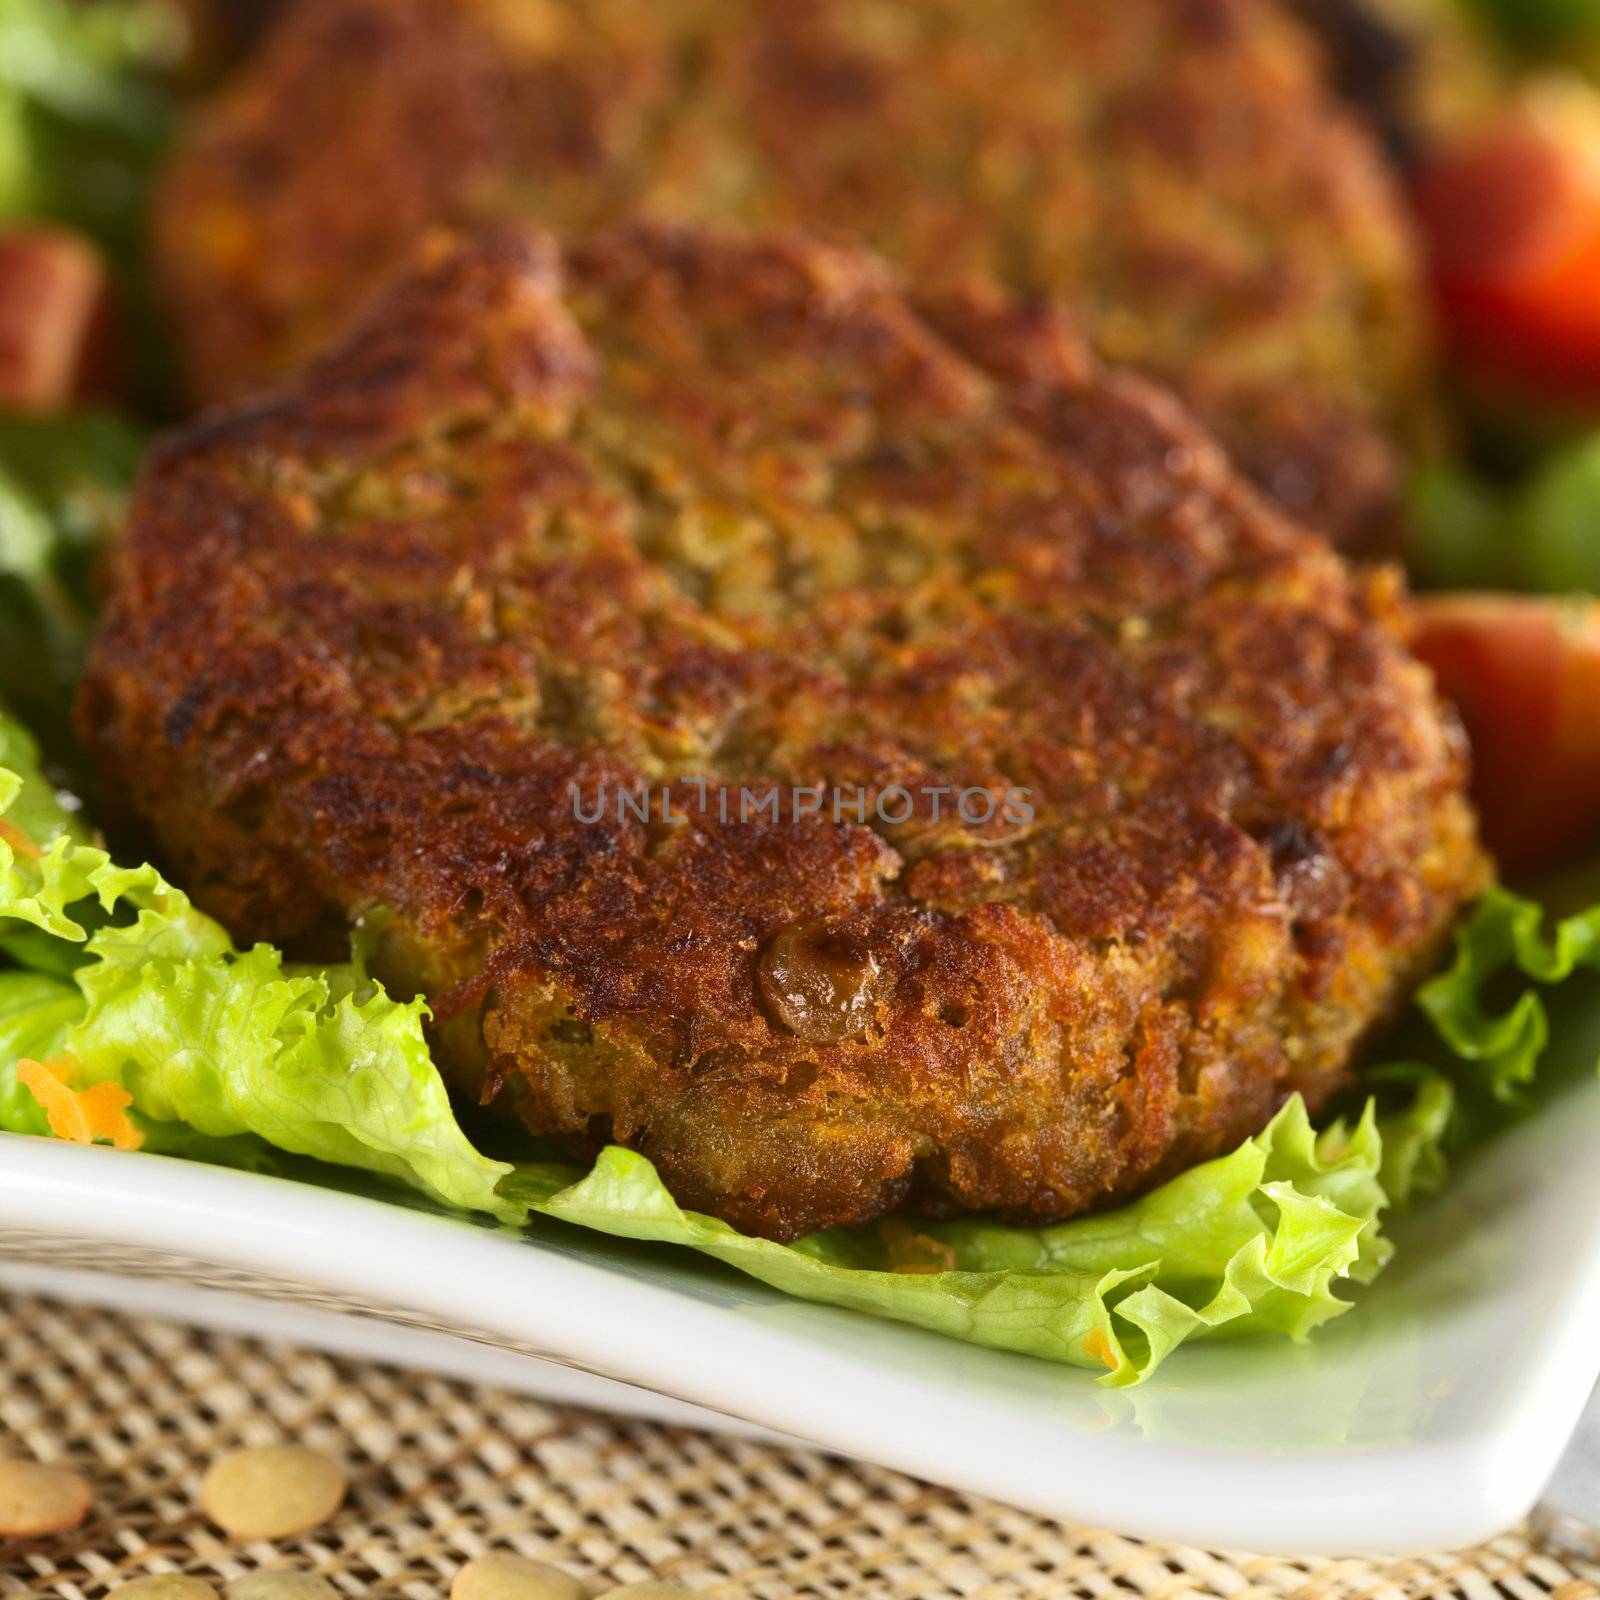 Vegetarian lentil burger made of brown lentils and grated carrots served on lettuce (Selective Focus, Focus on the front of the first burger)